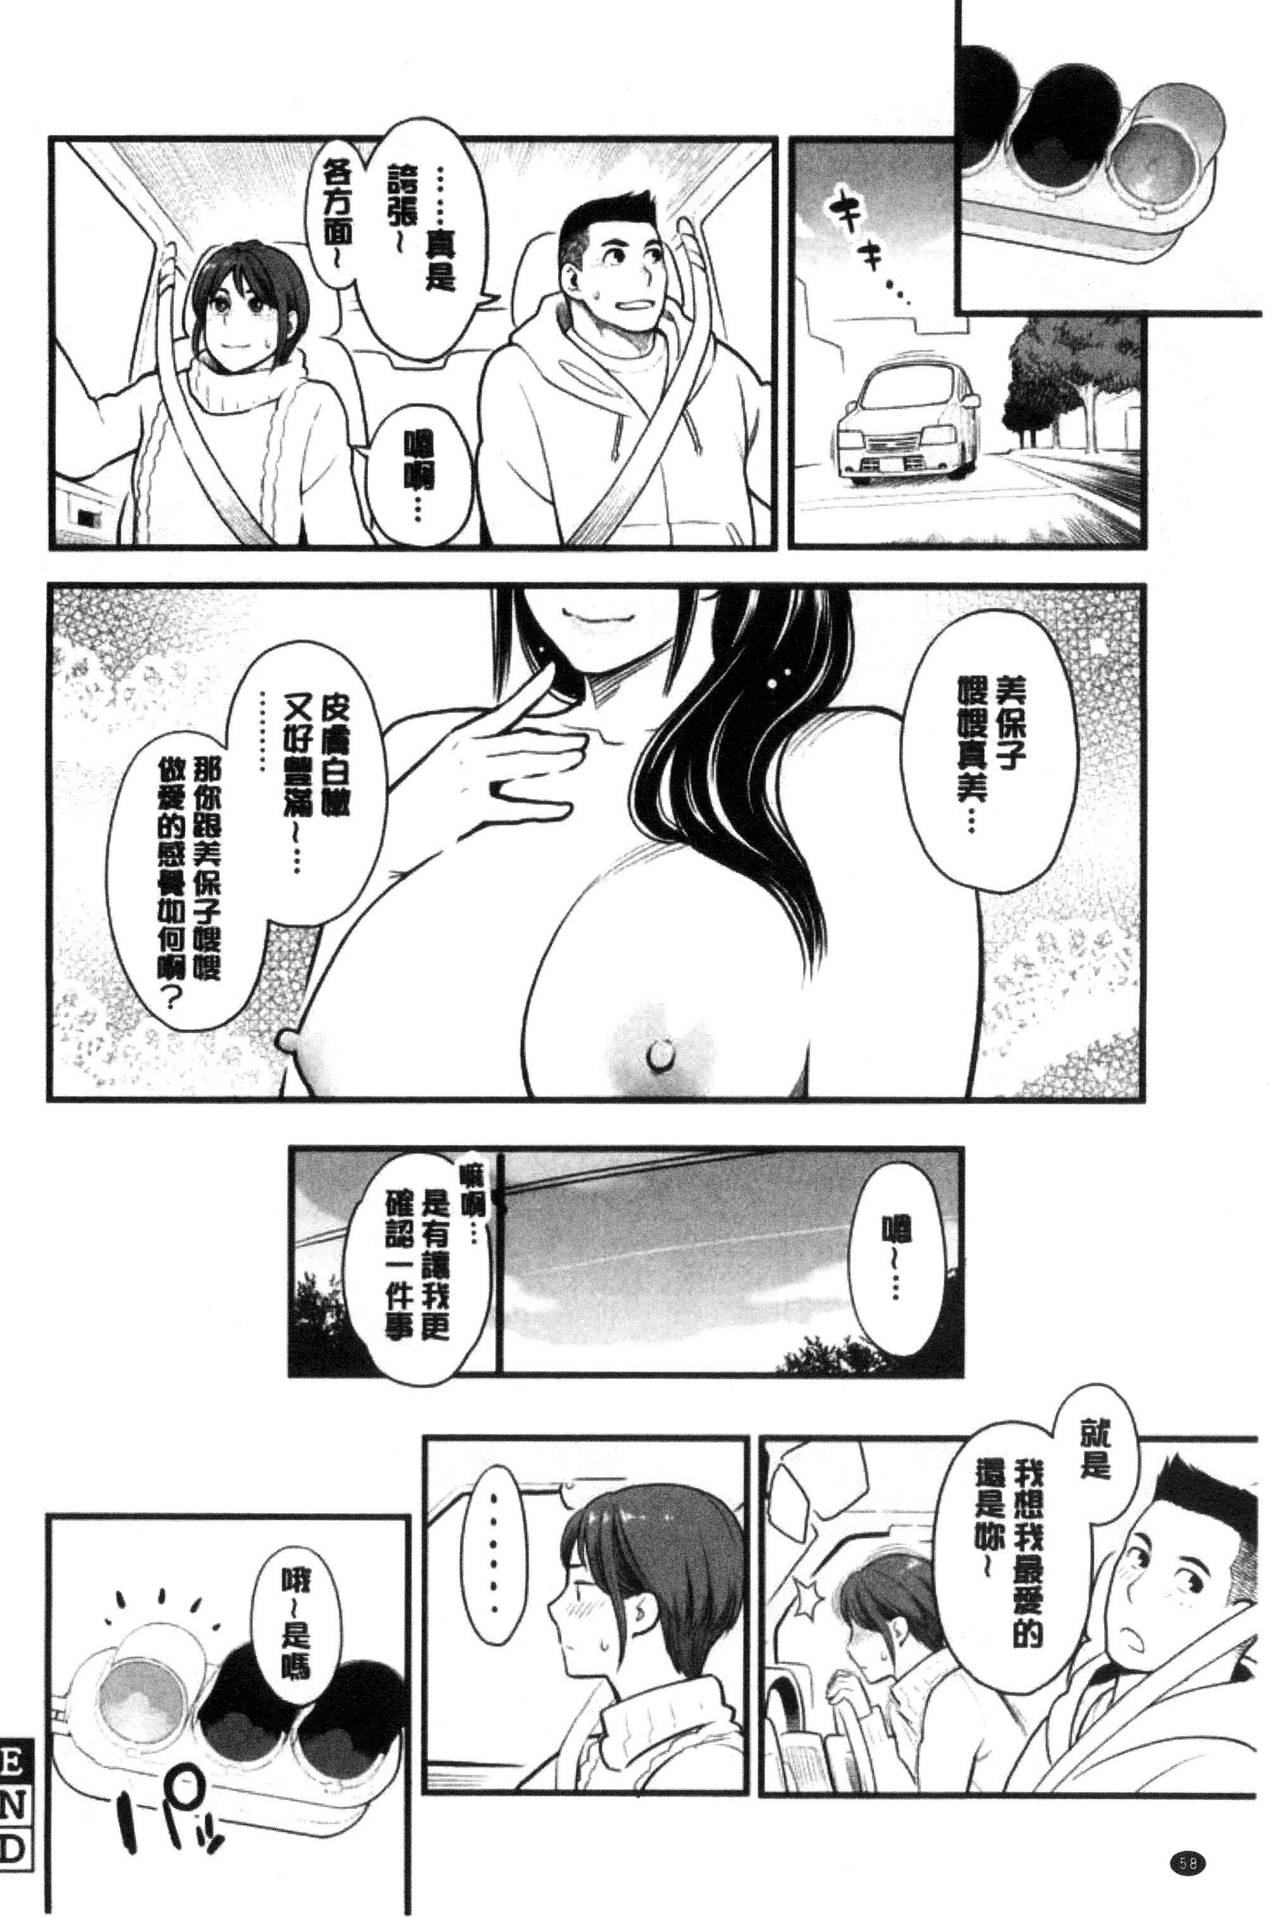 [Mikami Cannon] Kanojo no Mesugao - She has a indecent face [Chinese] [三上キャノン] 彼女の雌顔 [中文翻譯]